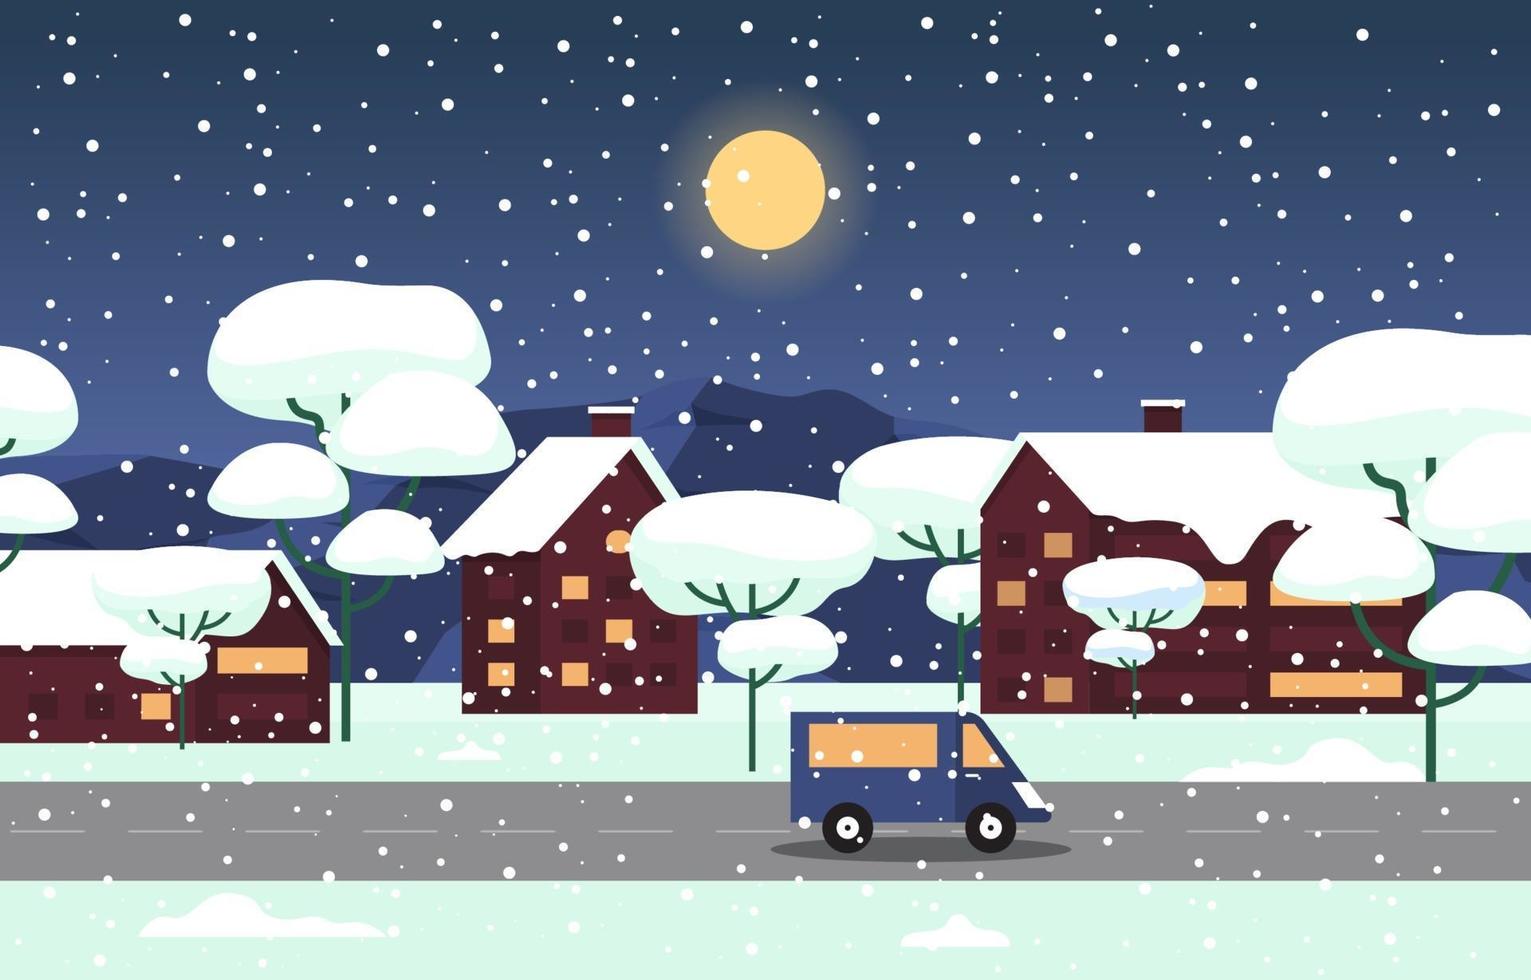 Cozy Snowy Winter City Scene with Trees, Homes, and Car vector